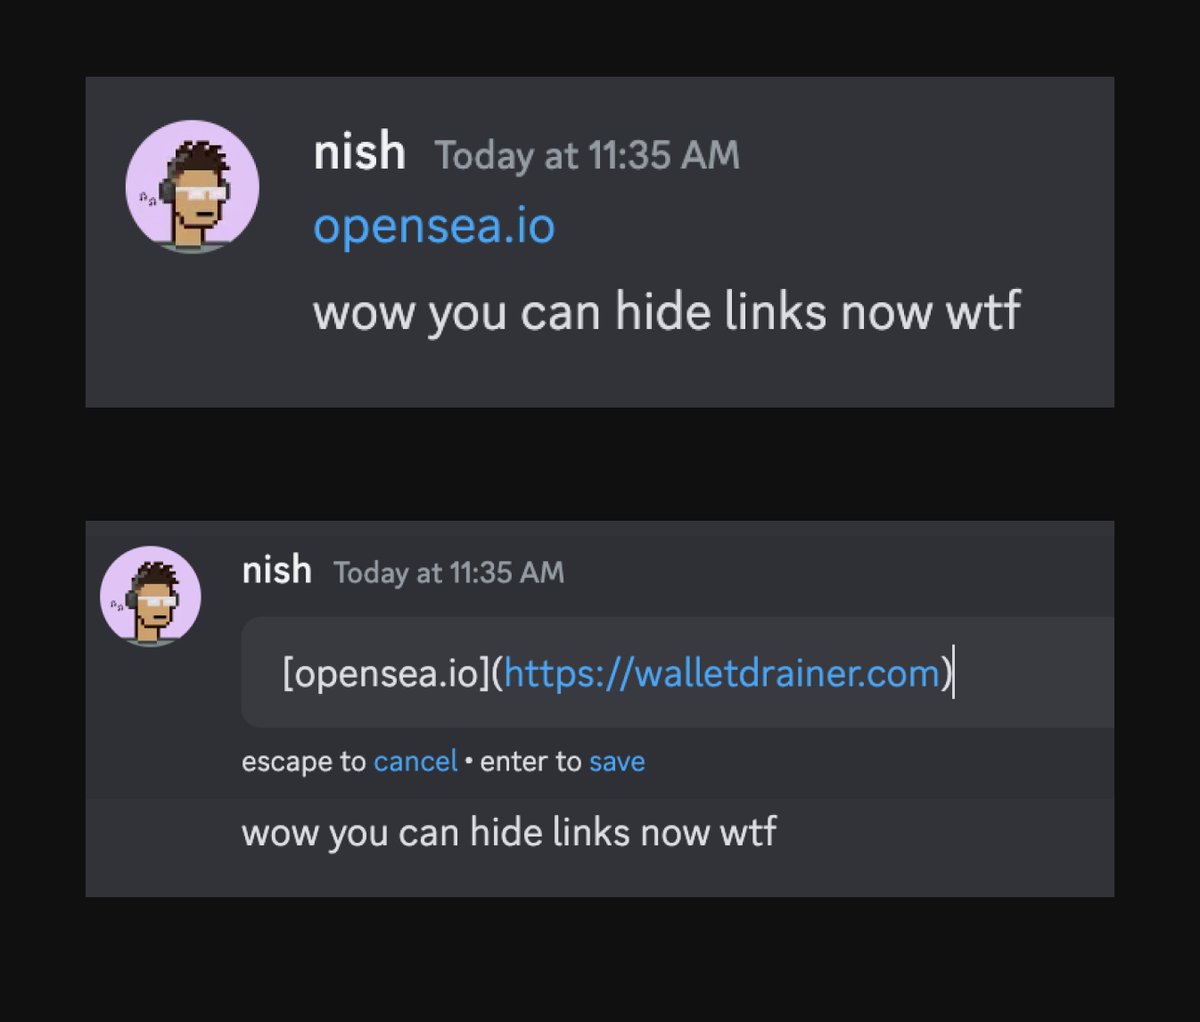 Scammers can now hide links in any discord text ☠️ Watch out for hidden wallet drainer links e.g. 👇